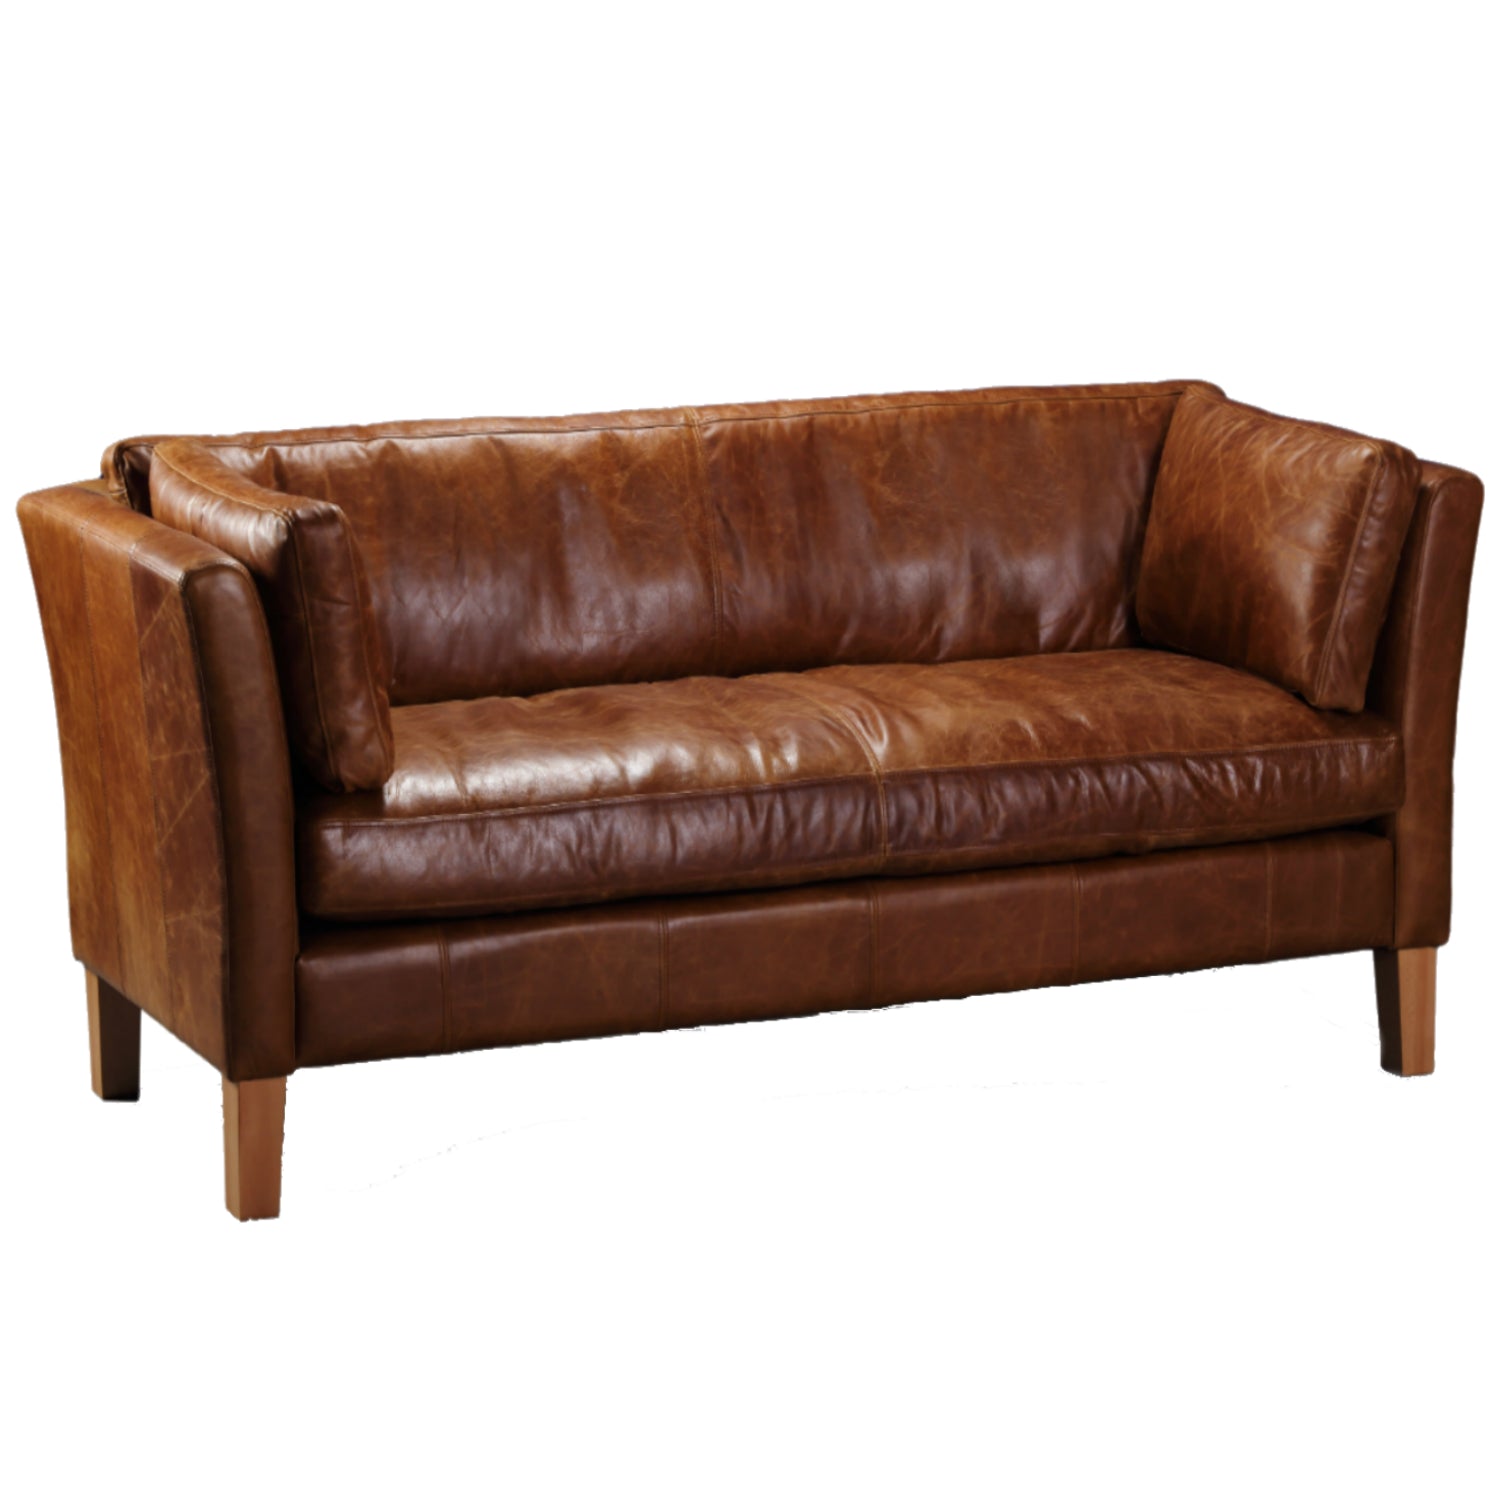 Barkby Full Aniline Leather Sofas-harris tweed leather sofas-Against The Grain Furniture-2 Seater-Against The Grain Furniture